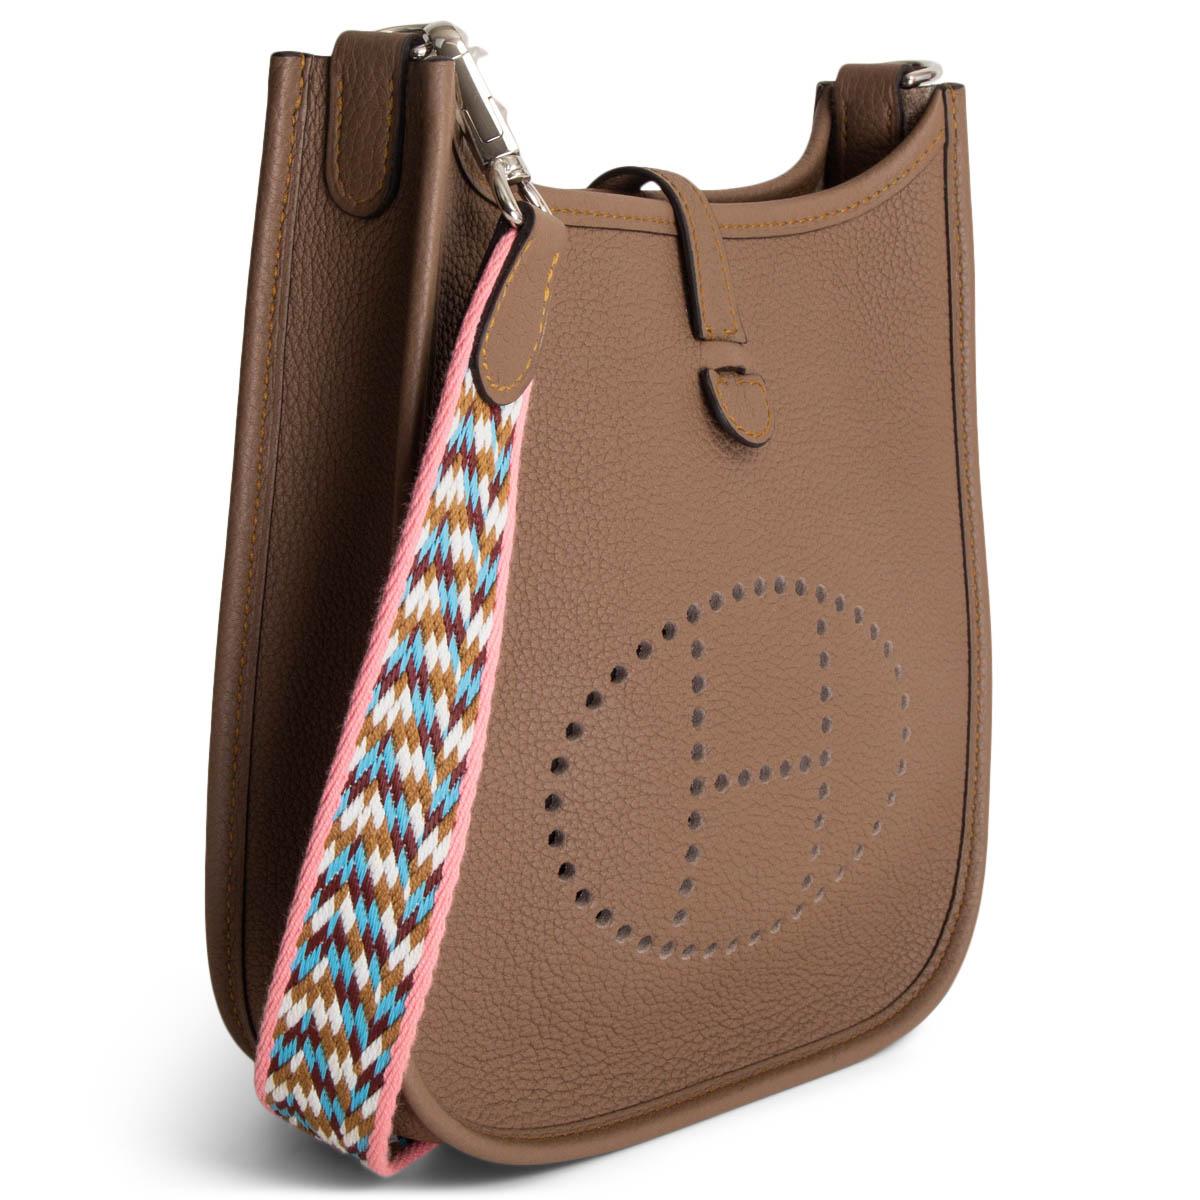 100% authentic Hermès Evelyne 16 Amazone crossbody bag in Beige Weimar Taurillon Maurice leather with wooly sangle zigzag shoulder strap in rose ete, Bleu du Nord, Rouge H, beige and blanc canvas. Perforated leather 